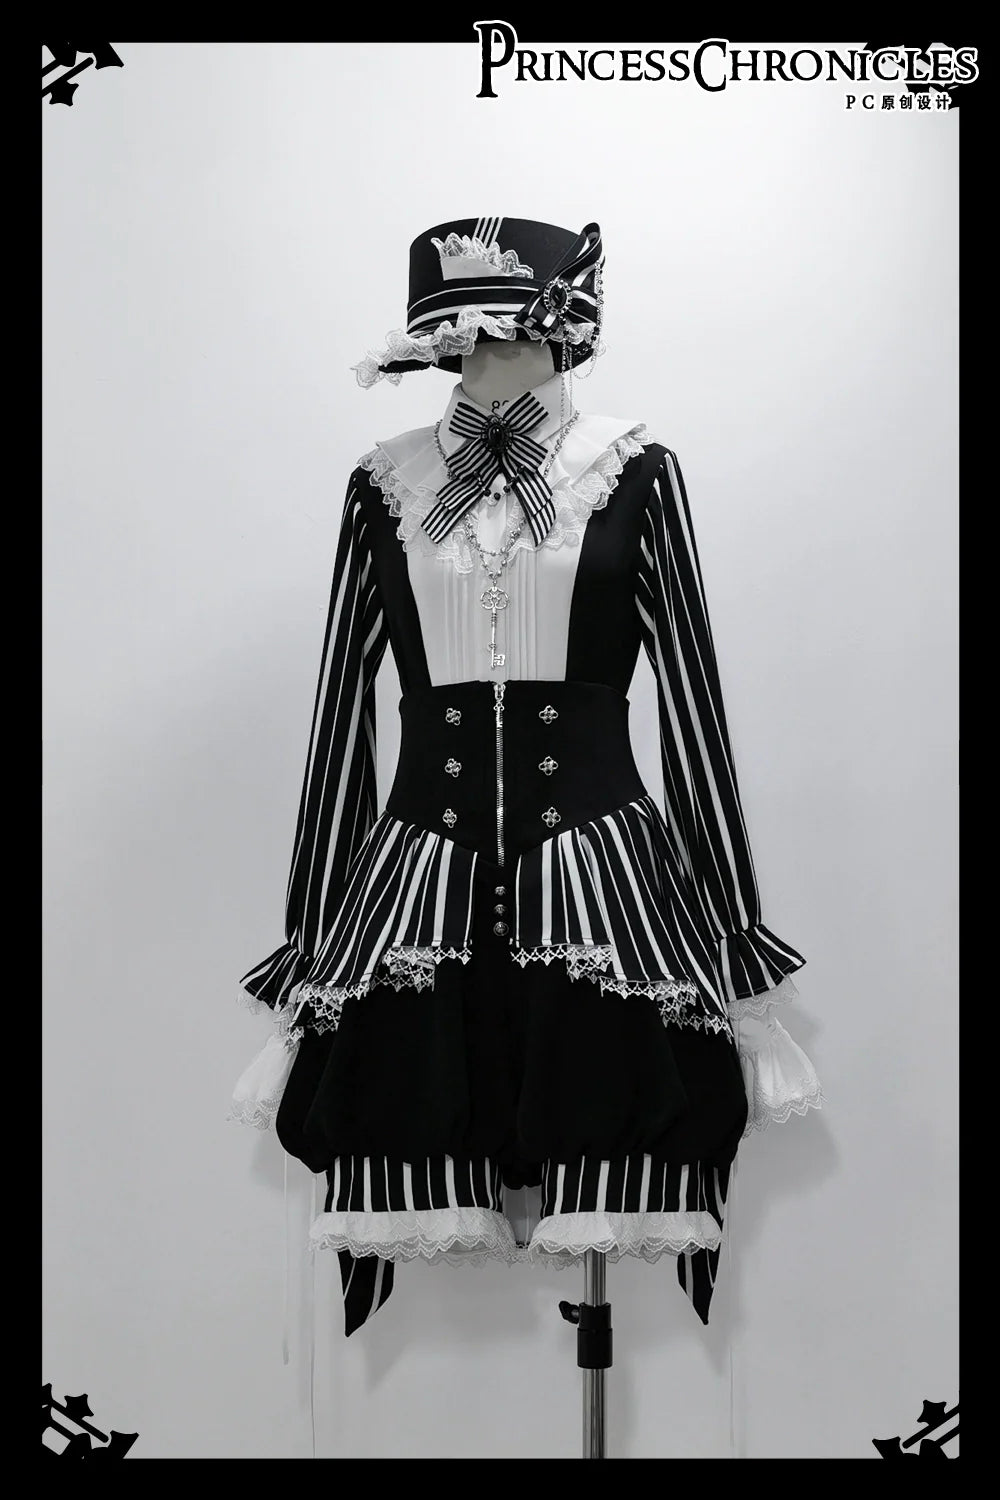 [Pre-orders available until 5/8] Marvelous Trick Prince-style striped blouse